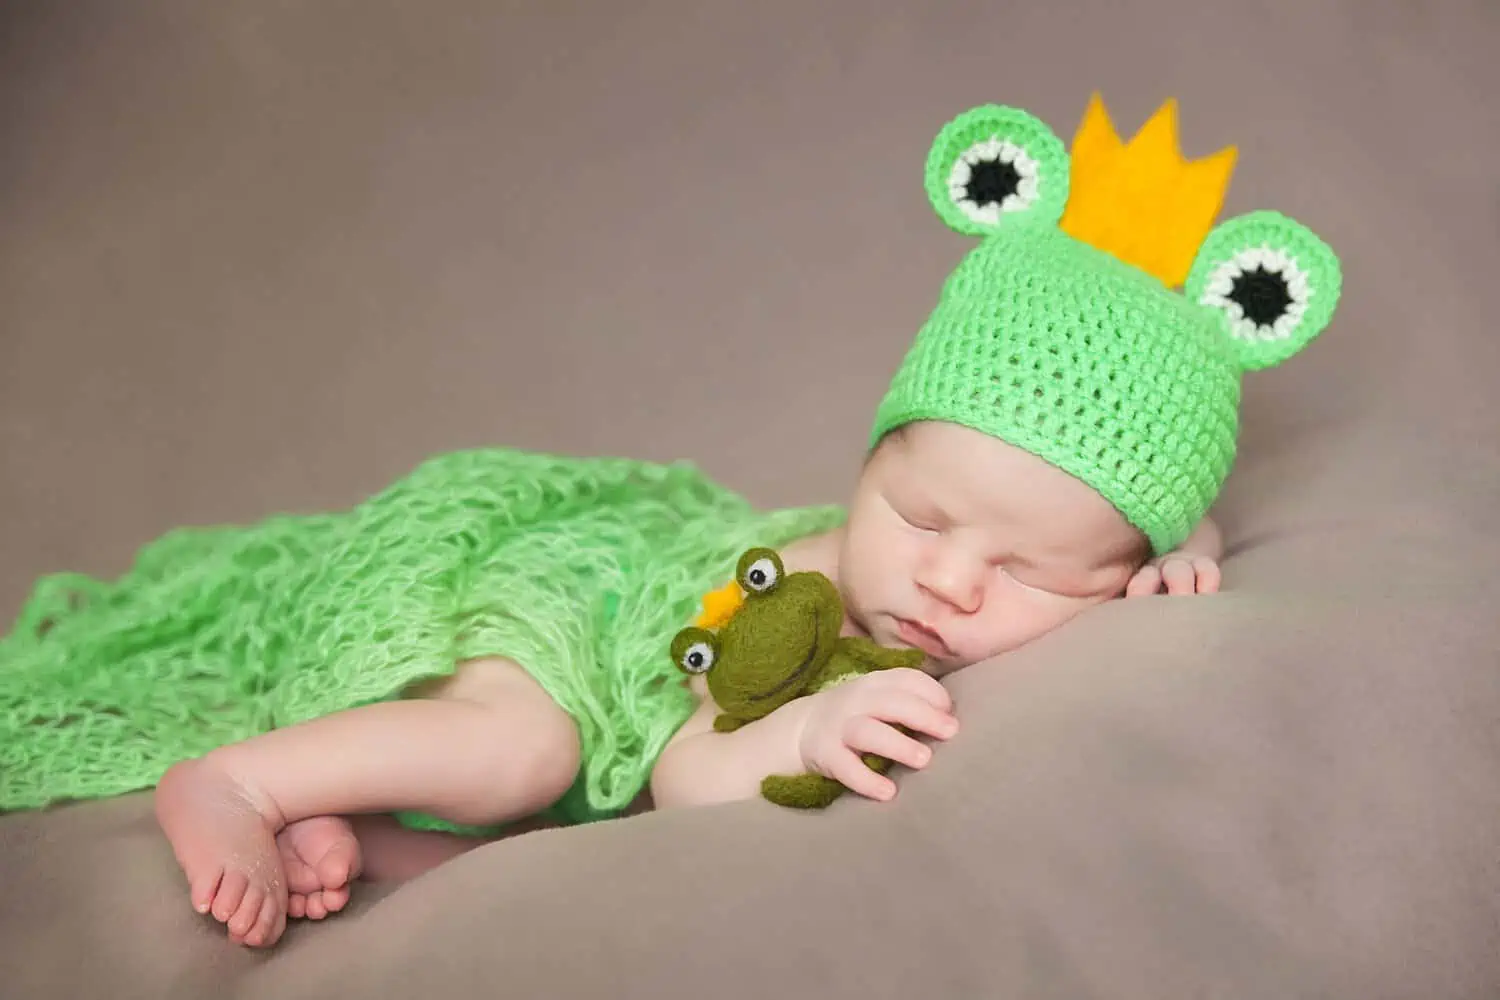 Cute newborn baby in frog costume with plush toy frog sleeping tightly on the bed